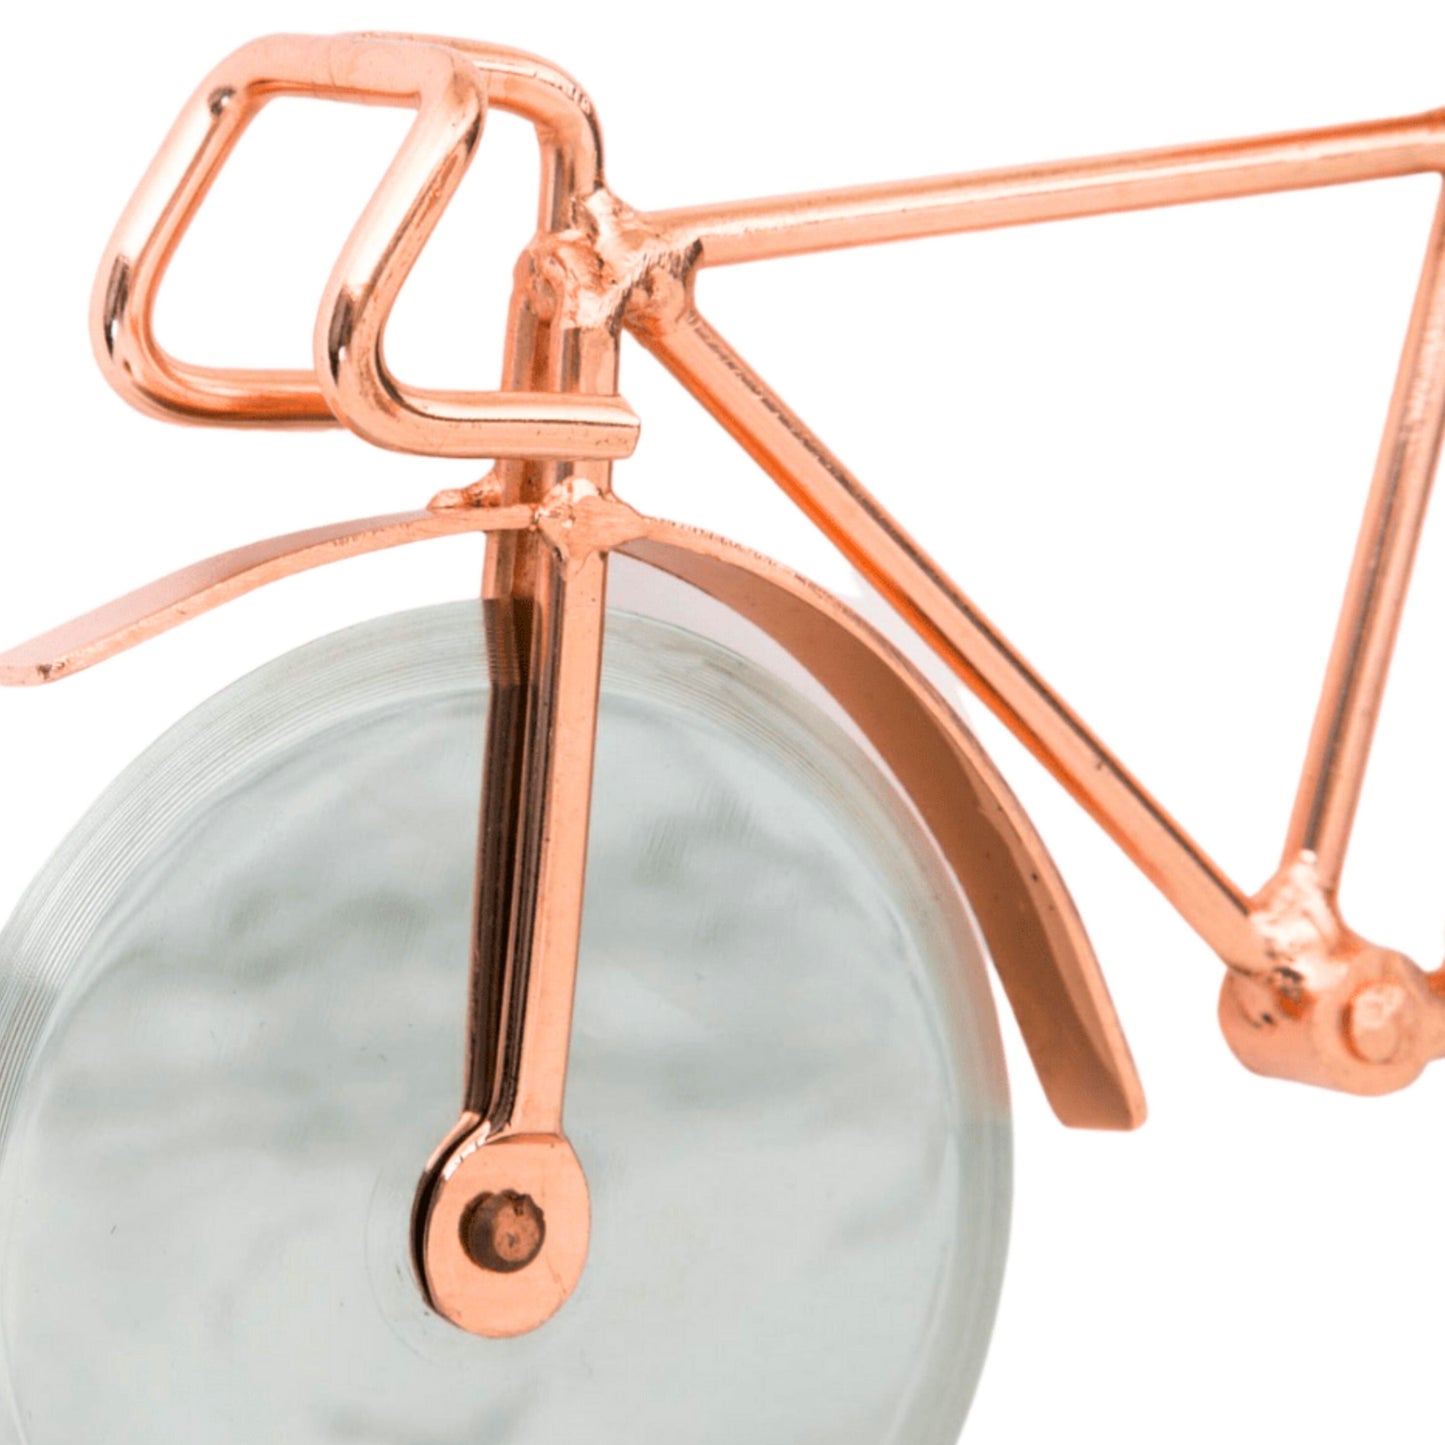 Bicycle Pizza Cutter, Stainless Steel Rose Gold, Handmade Novelty Kitchenware - Aksa Home Decor 